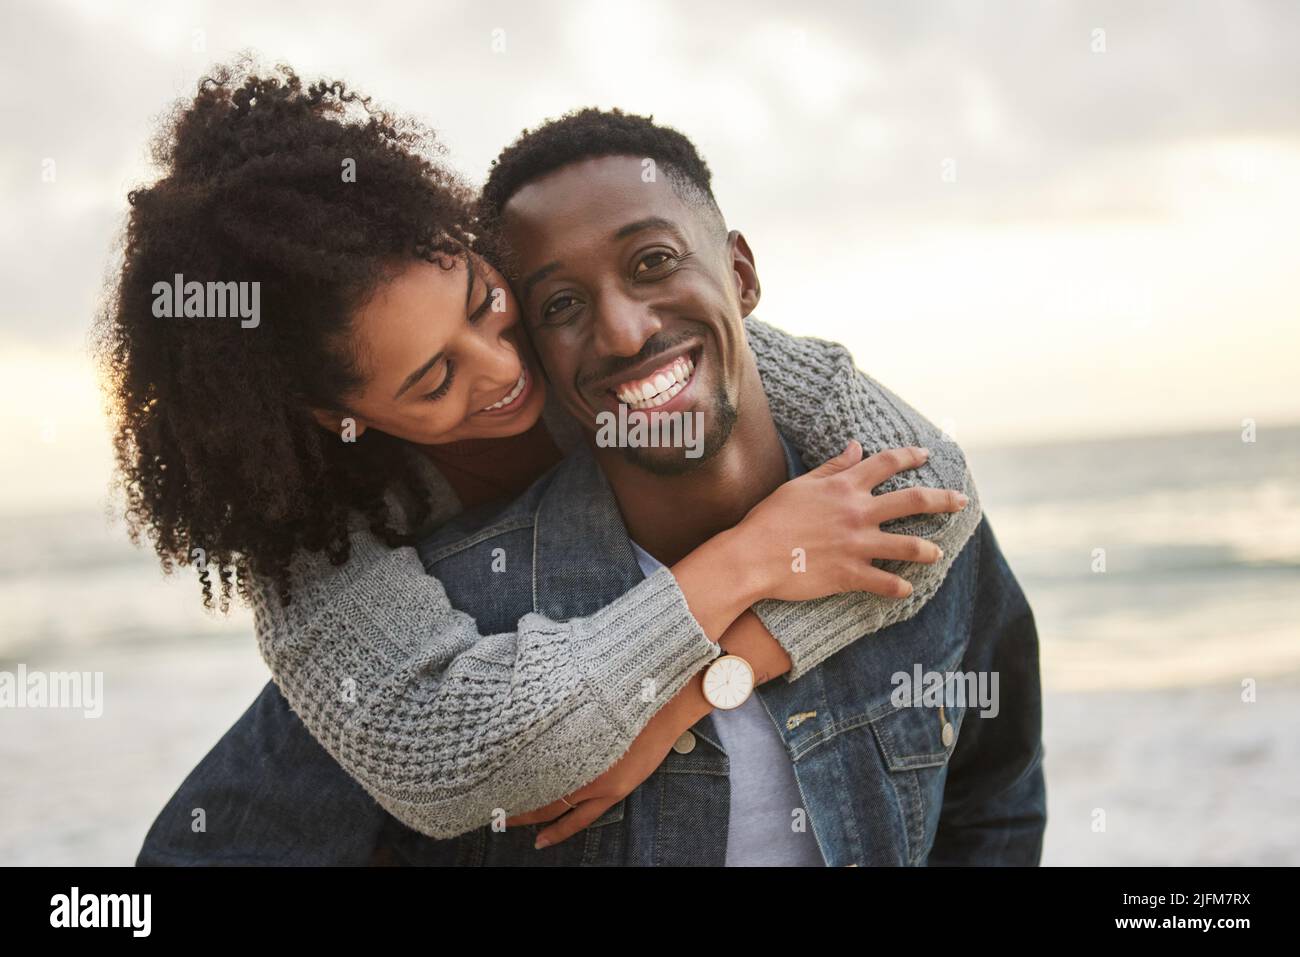 Smiling young multiethnic couple having a fun afternoon at the beach Stock Photo